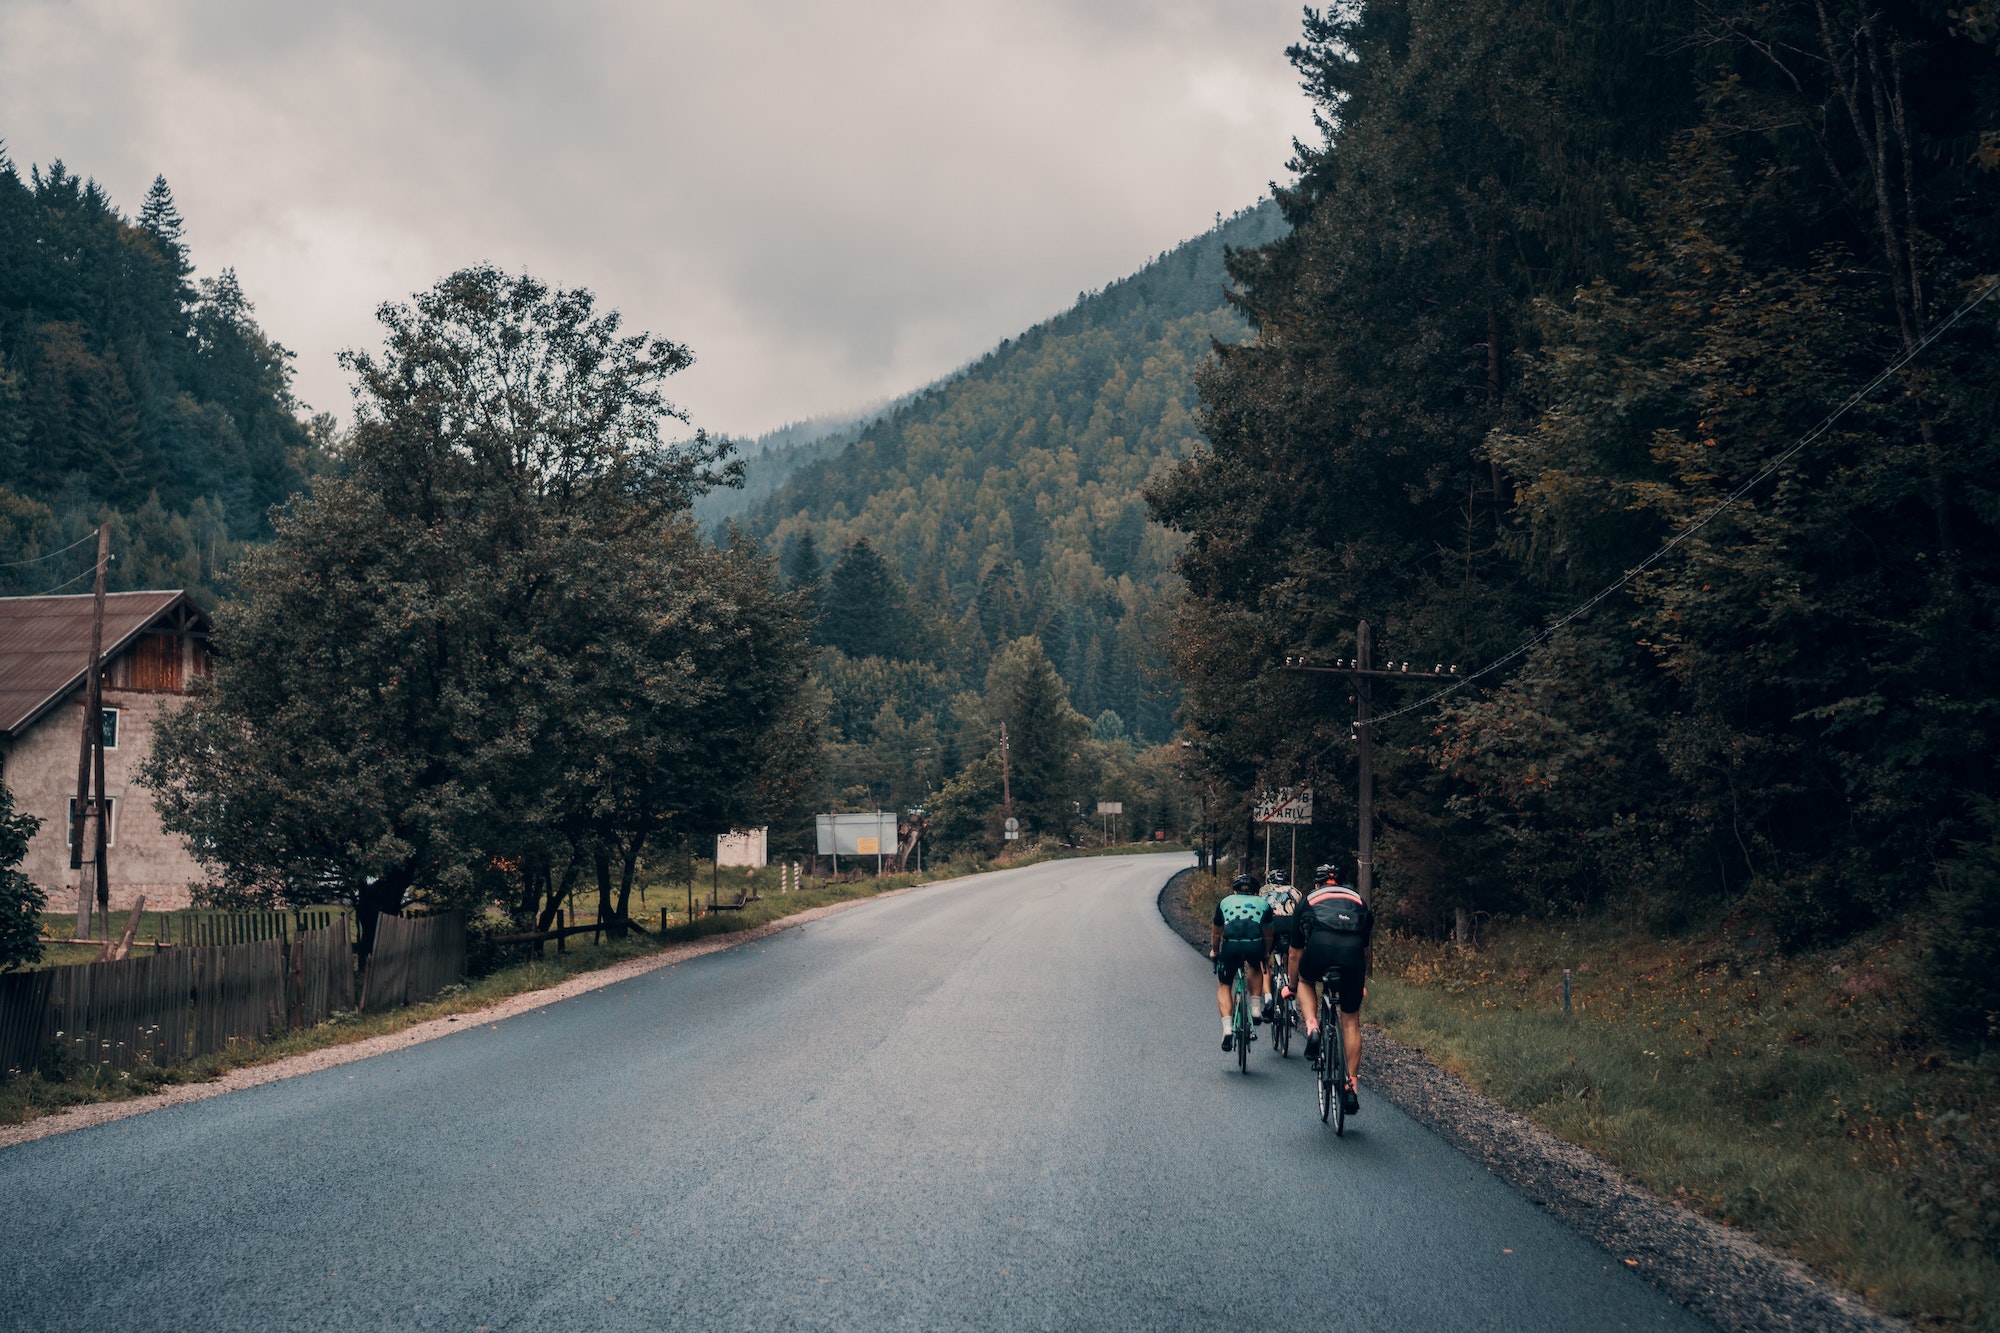 Road cyclists on the road cycling along a forest – Photo by Viktor Bystrov on Unsplash